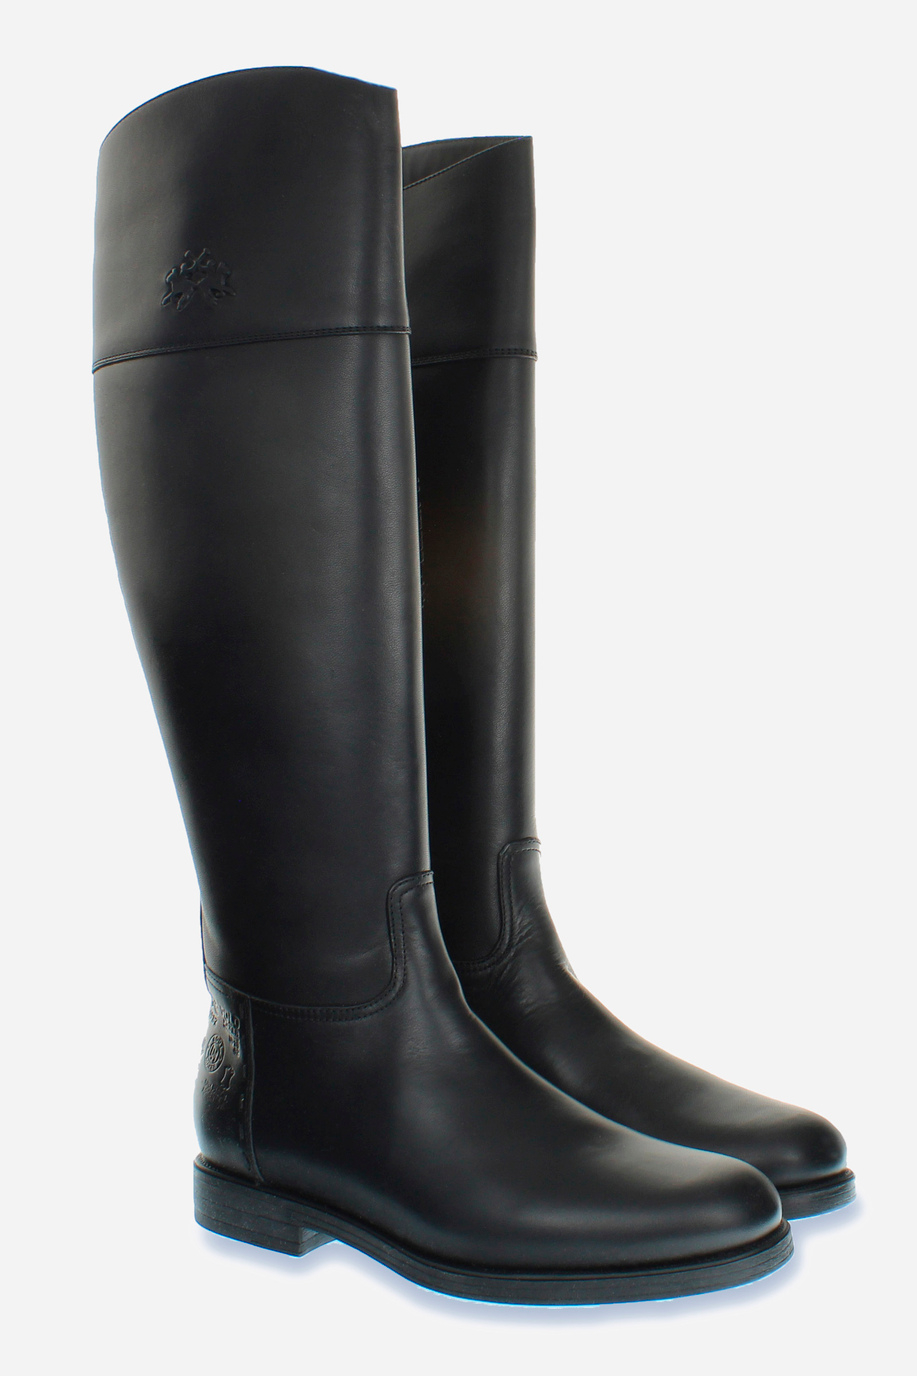 Women’s equestrian style leather boot - Business Looks Women | La Martina - Official Online Shop